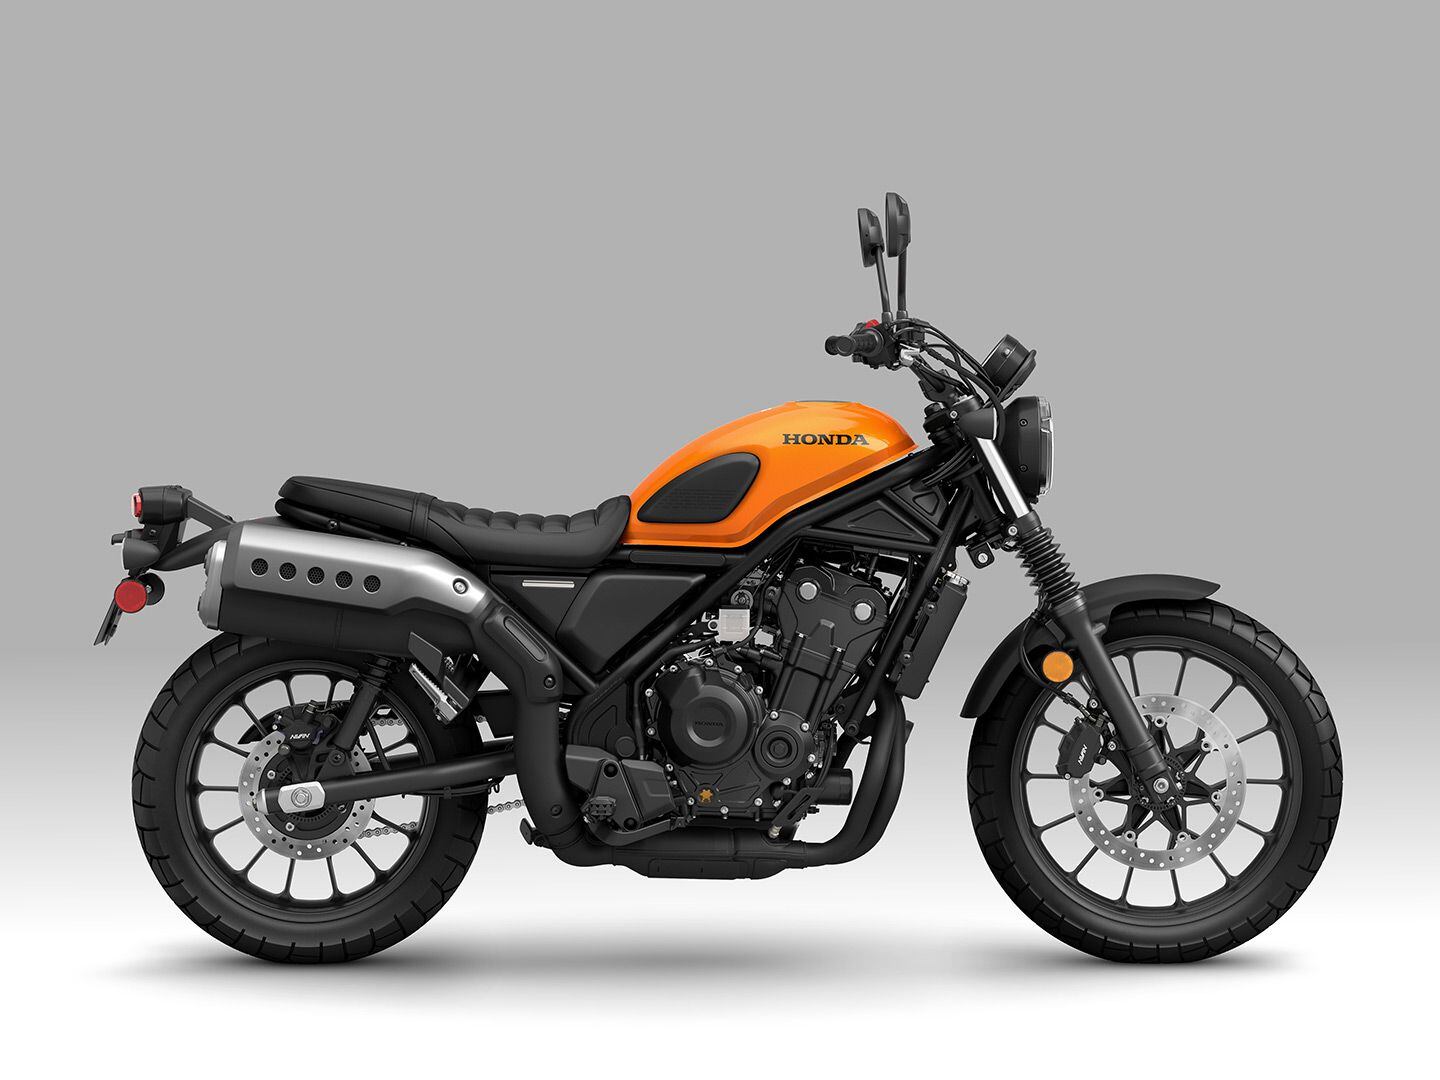 High pipes with 19-inch front and 17-inch rear tires add to the scrambler character of the Honda SCL500.